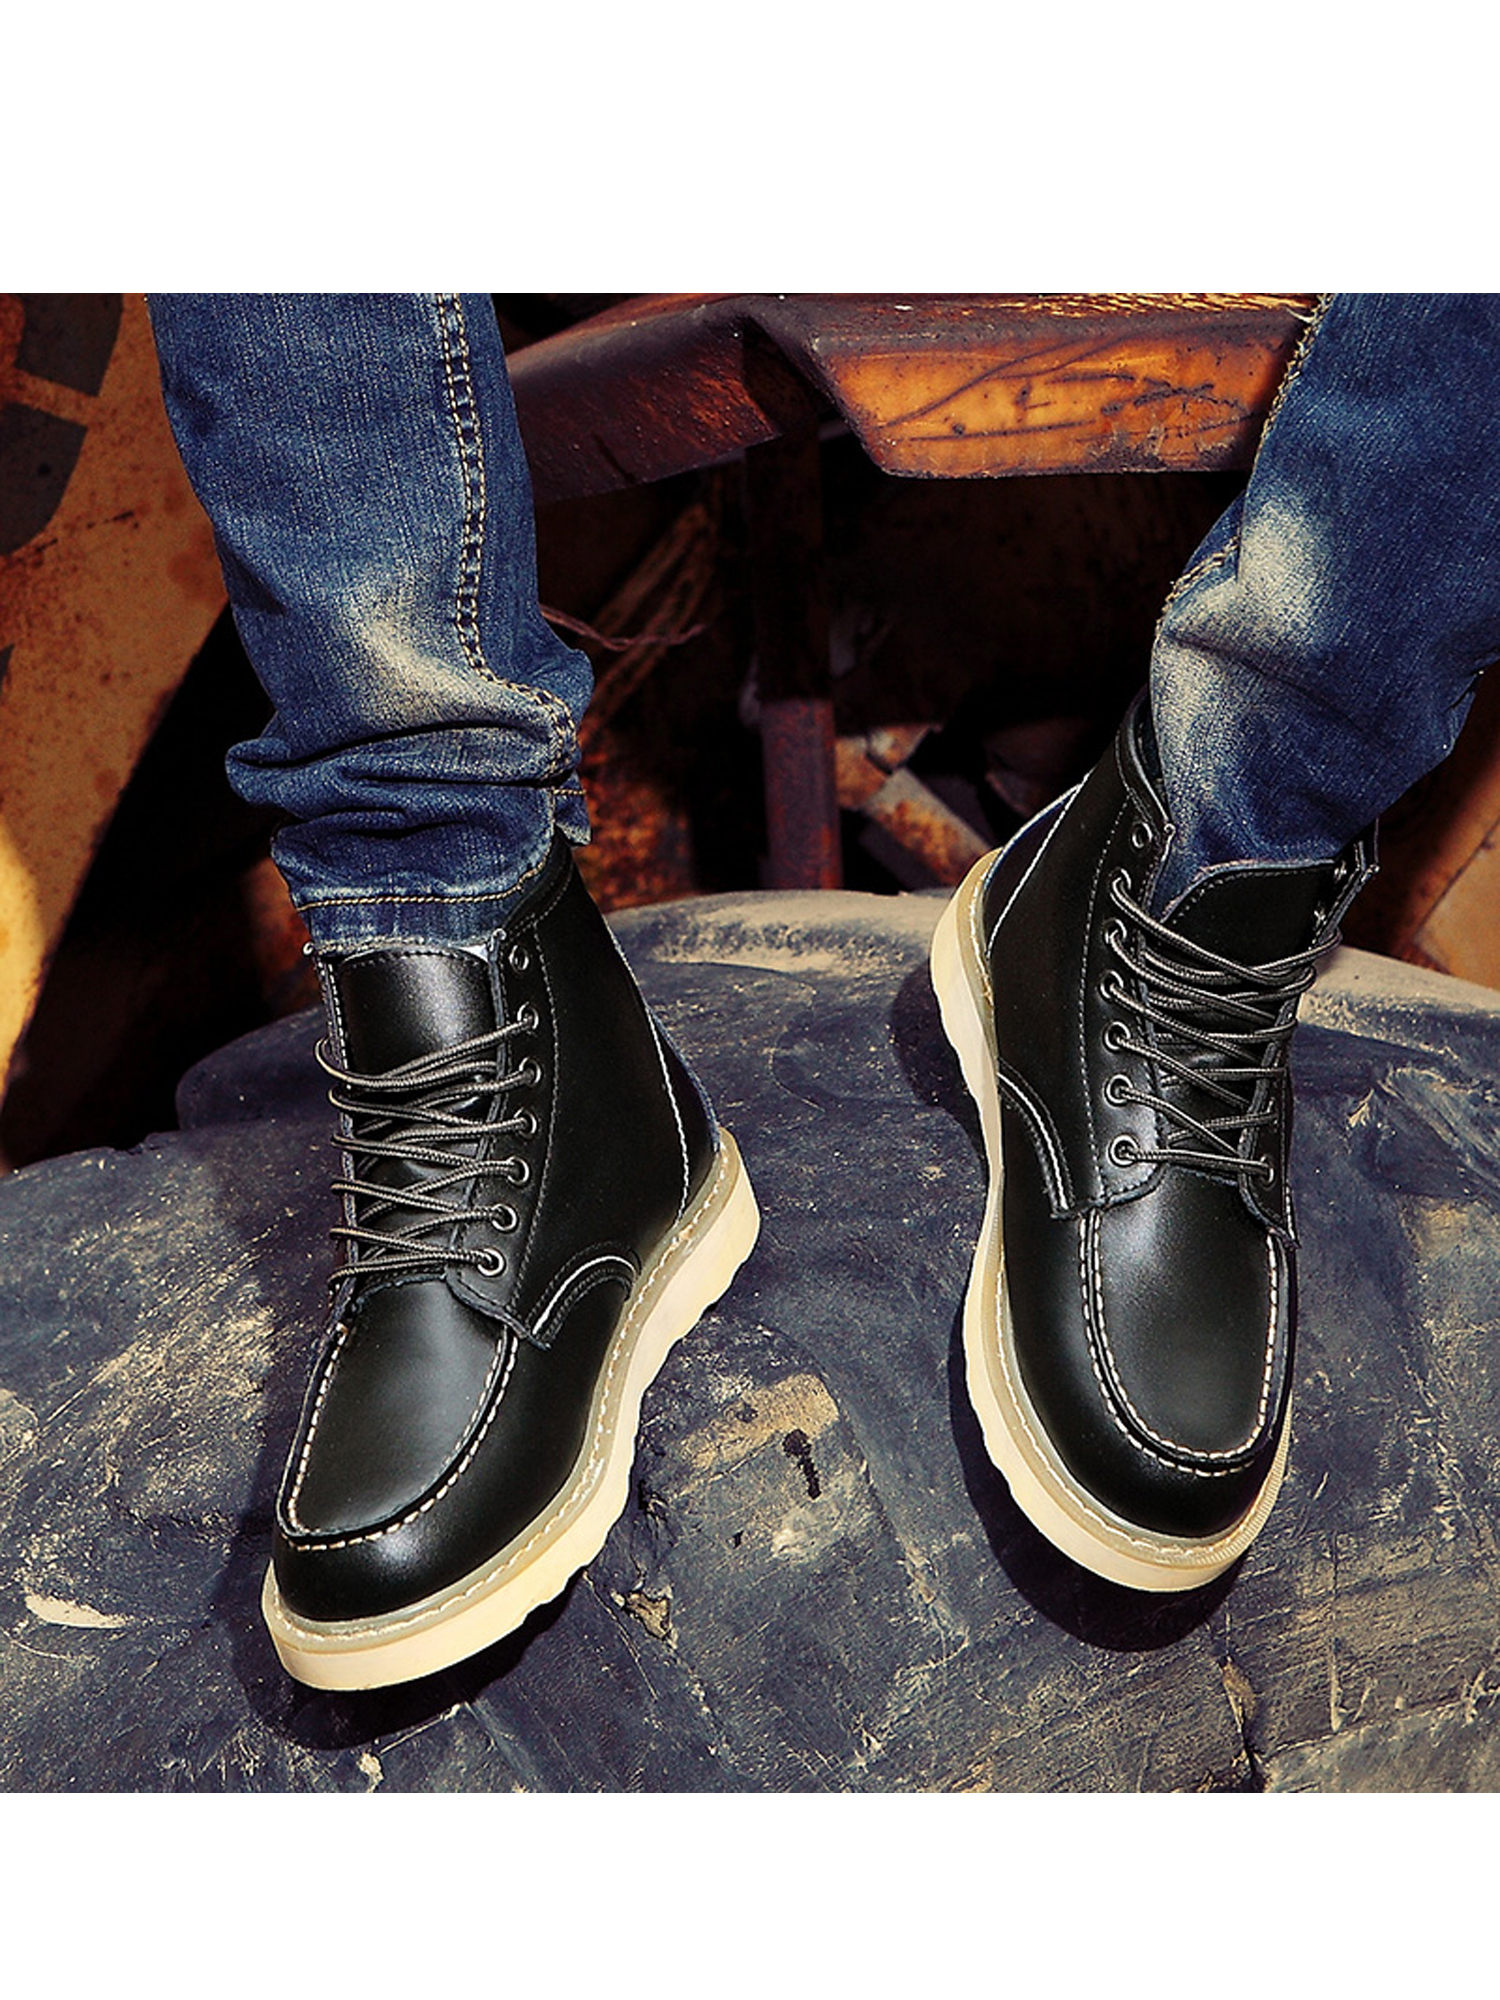 Avamo Men Leather Boots Motorcycle Shoes Boots Shoe Lace-Up Ankle Boot - image 3 of 4